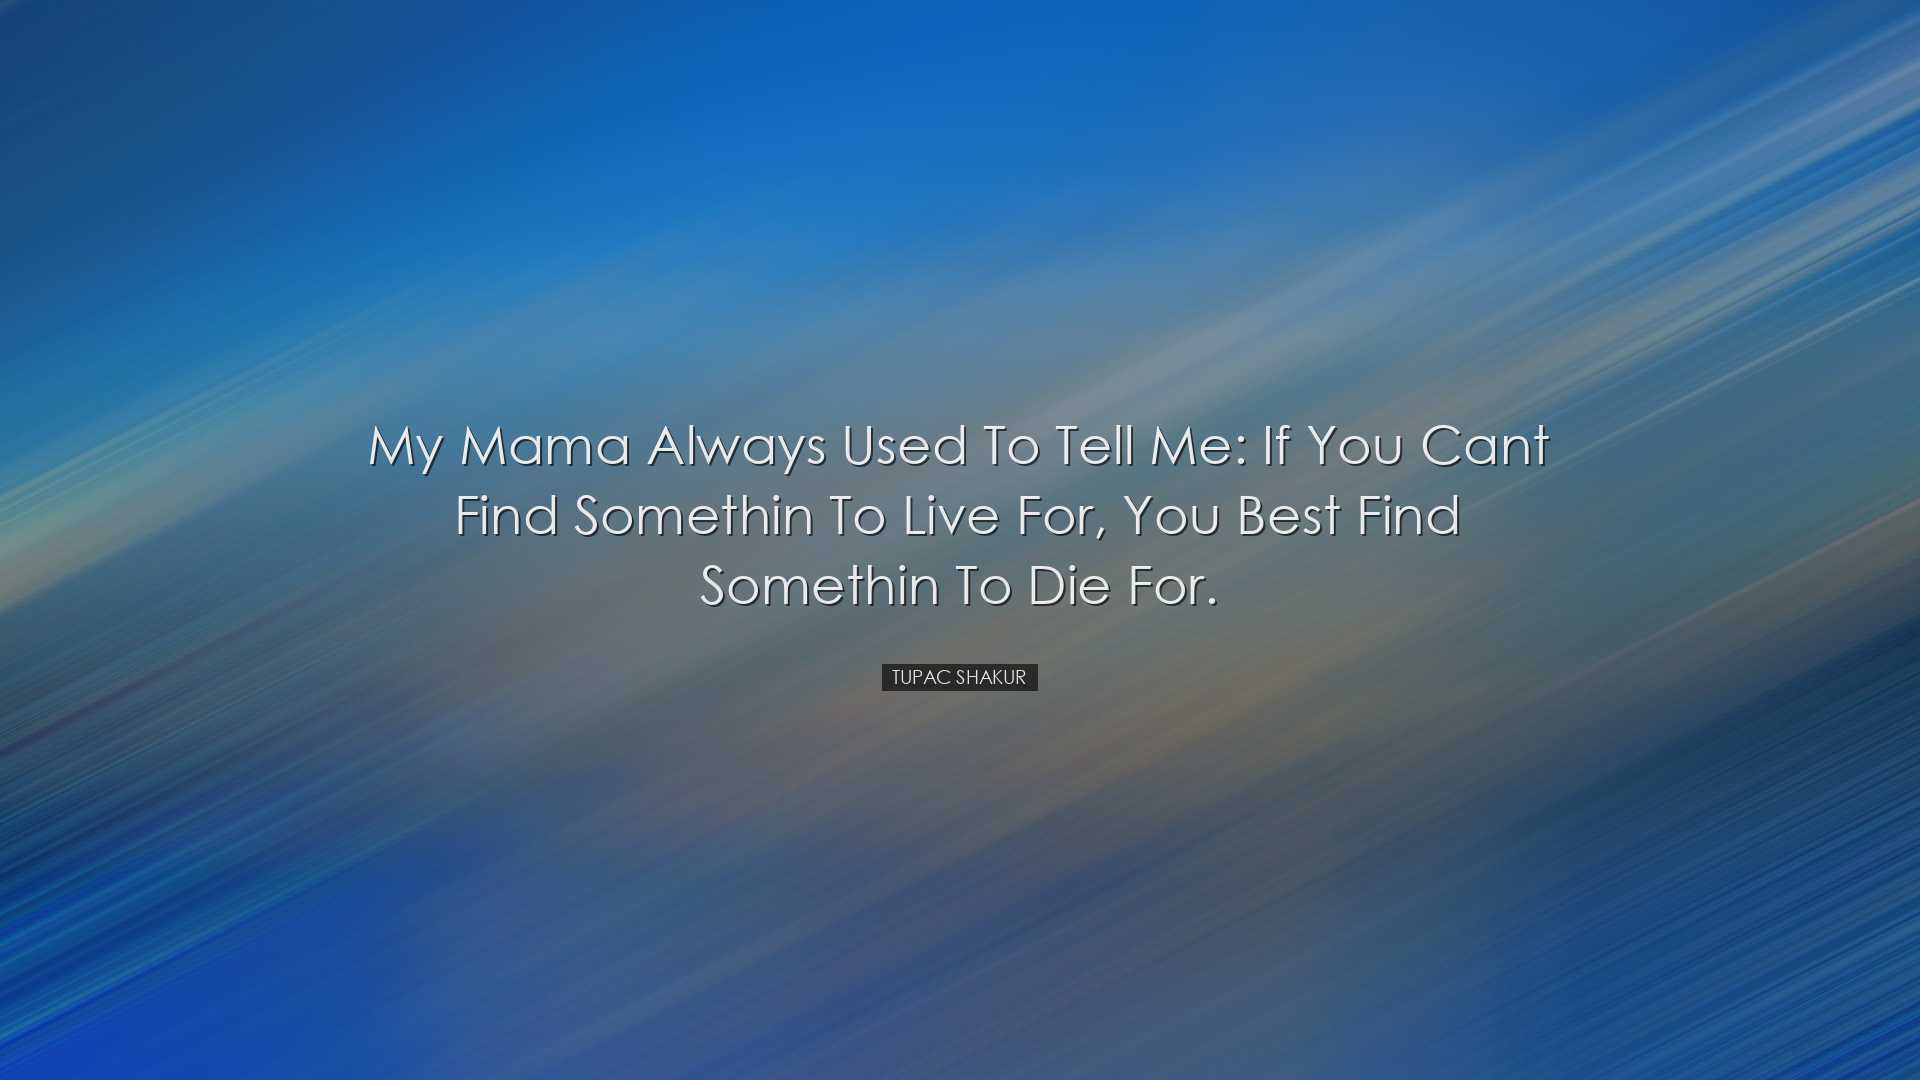 My mama always used to tell me: If you cant find somethin to live